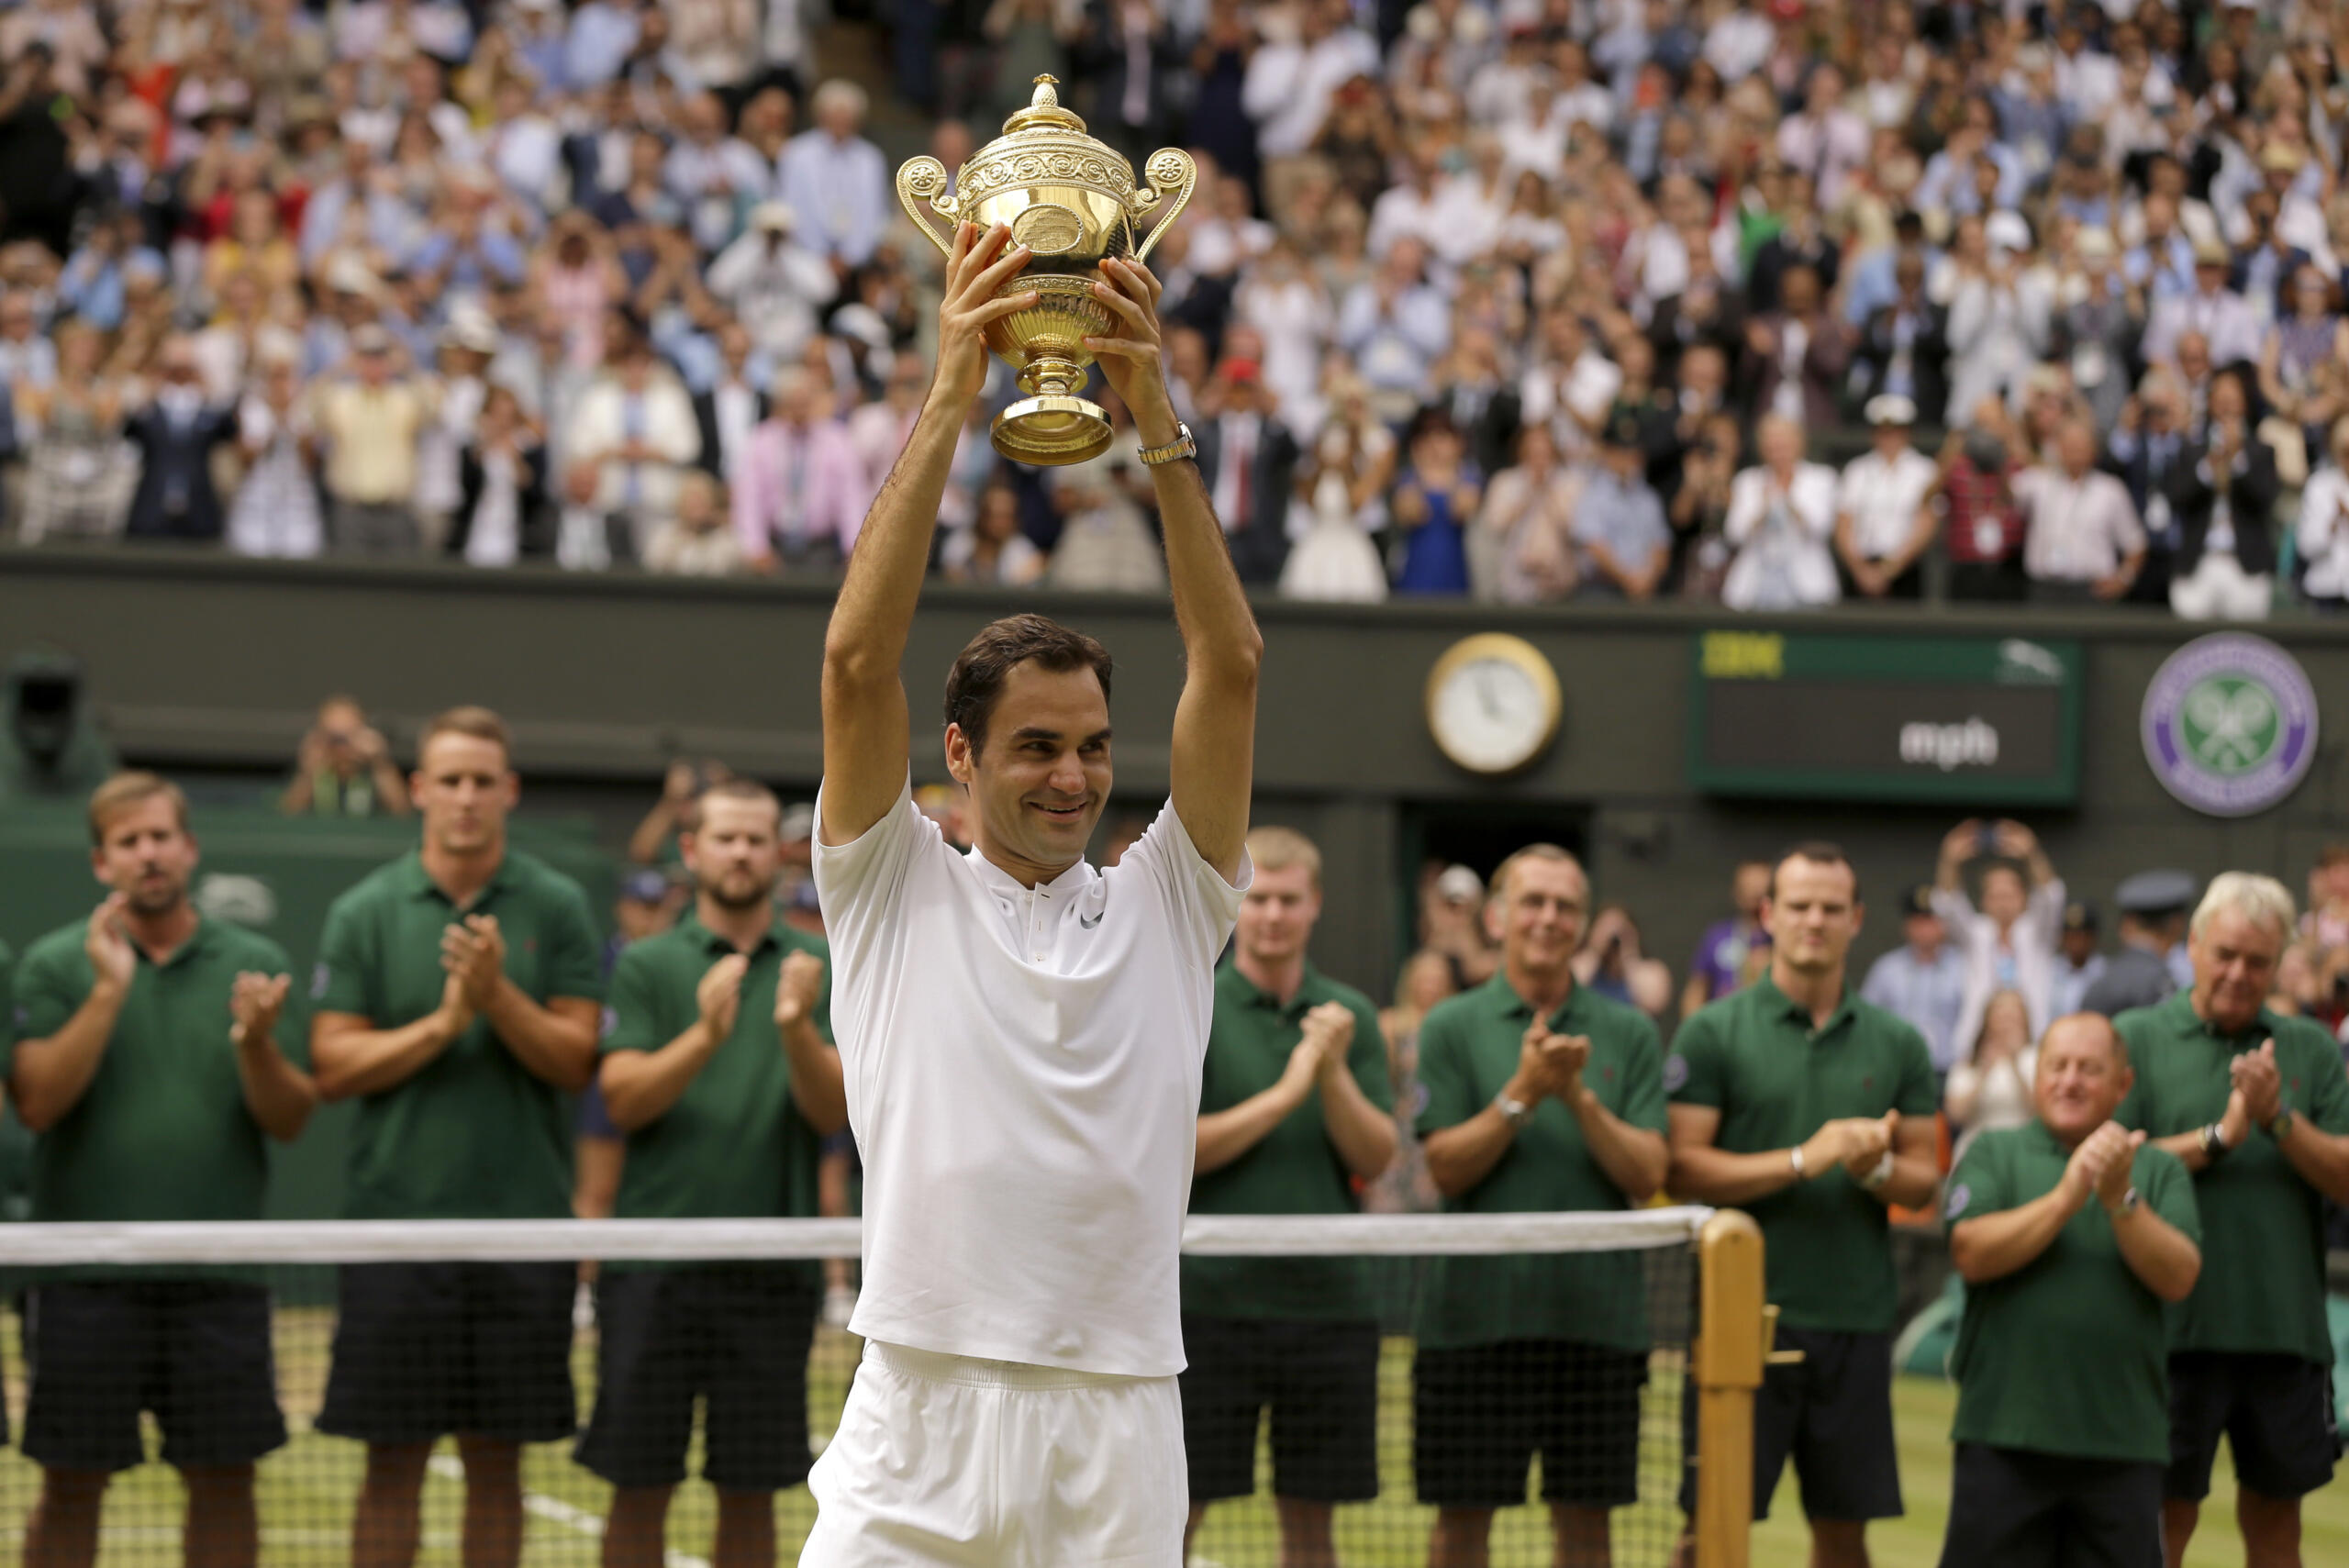 Federer says he is retiring from pro tennis at age 41 - The Columbian